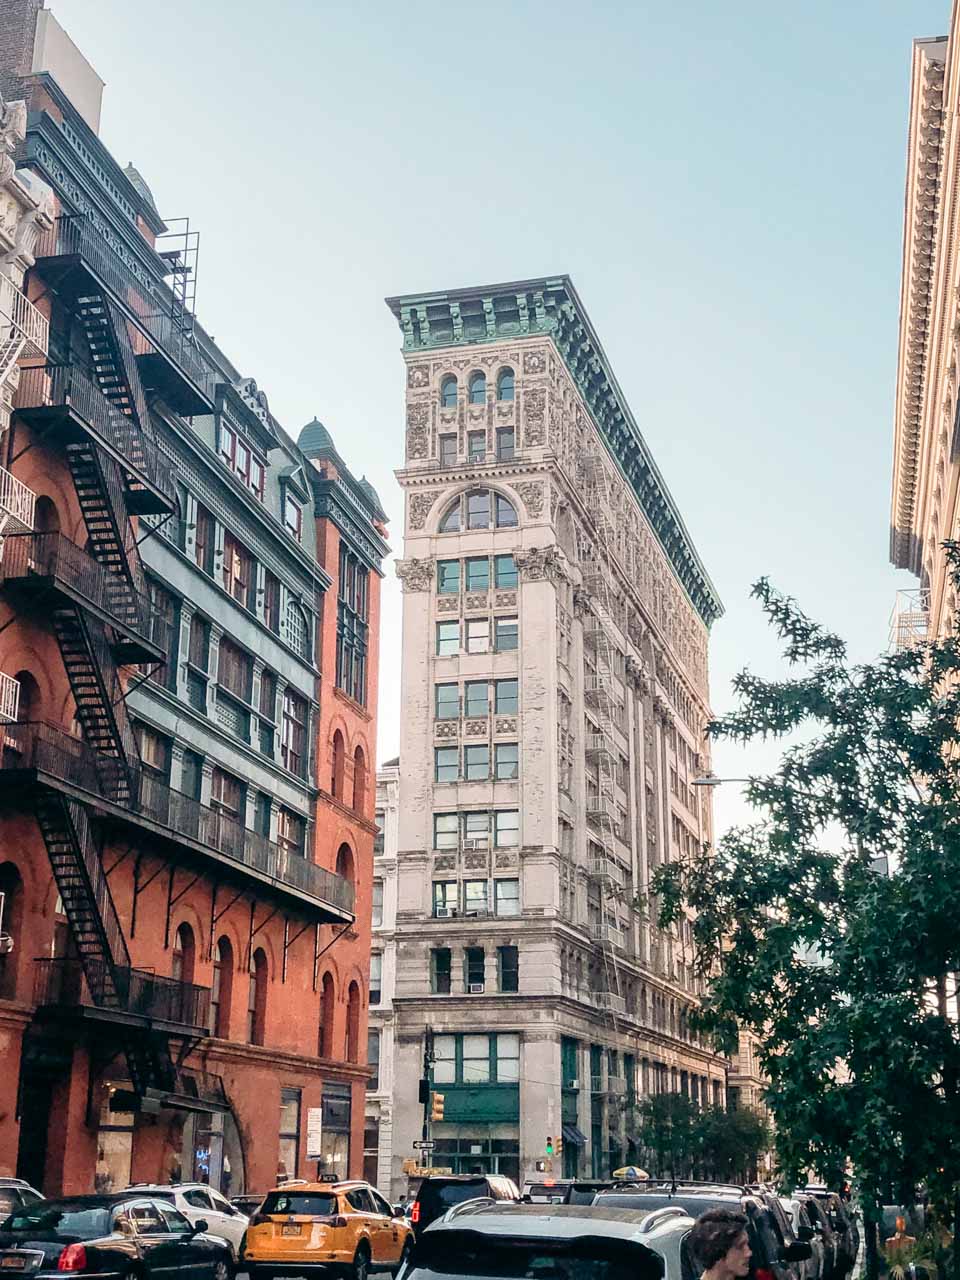 A cast iron building on the corner of Broome Street and Broadway, New York